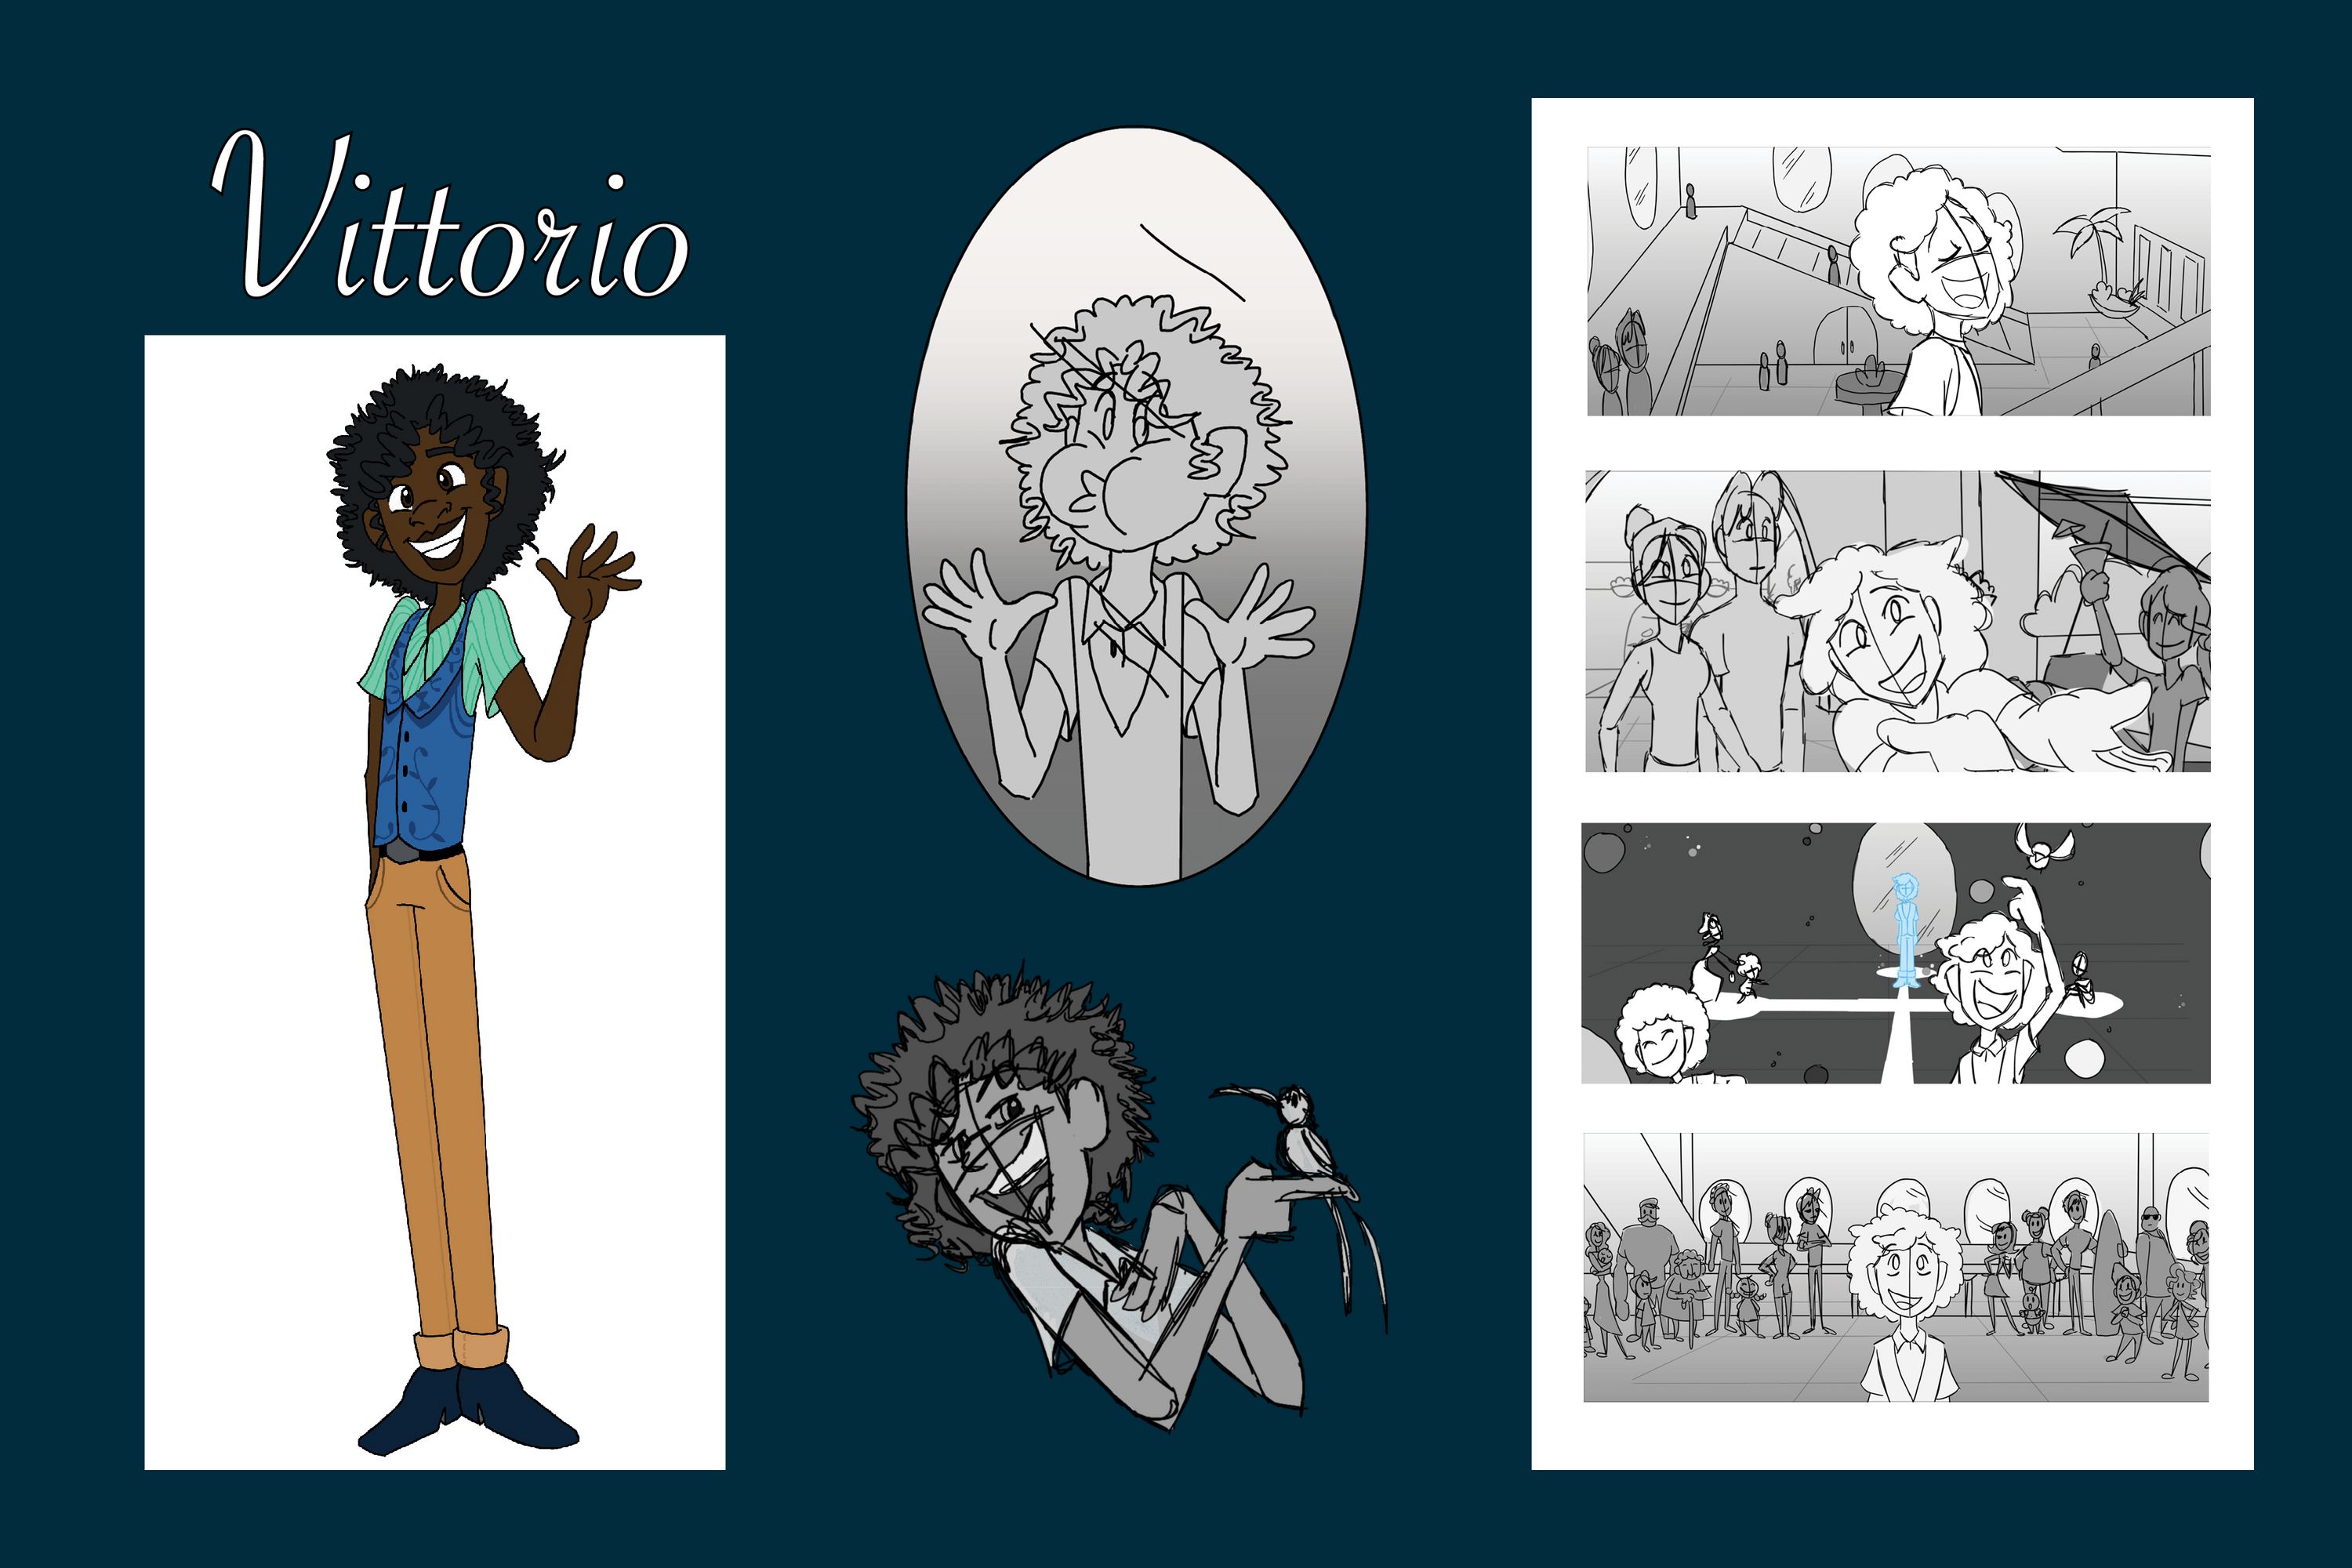 The main character from my musical board, Vittorio.